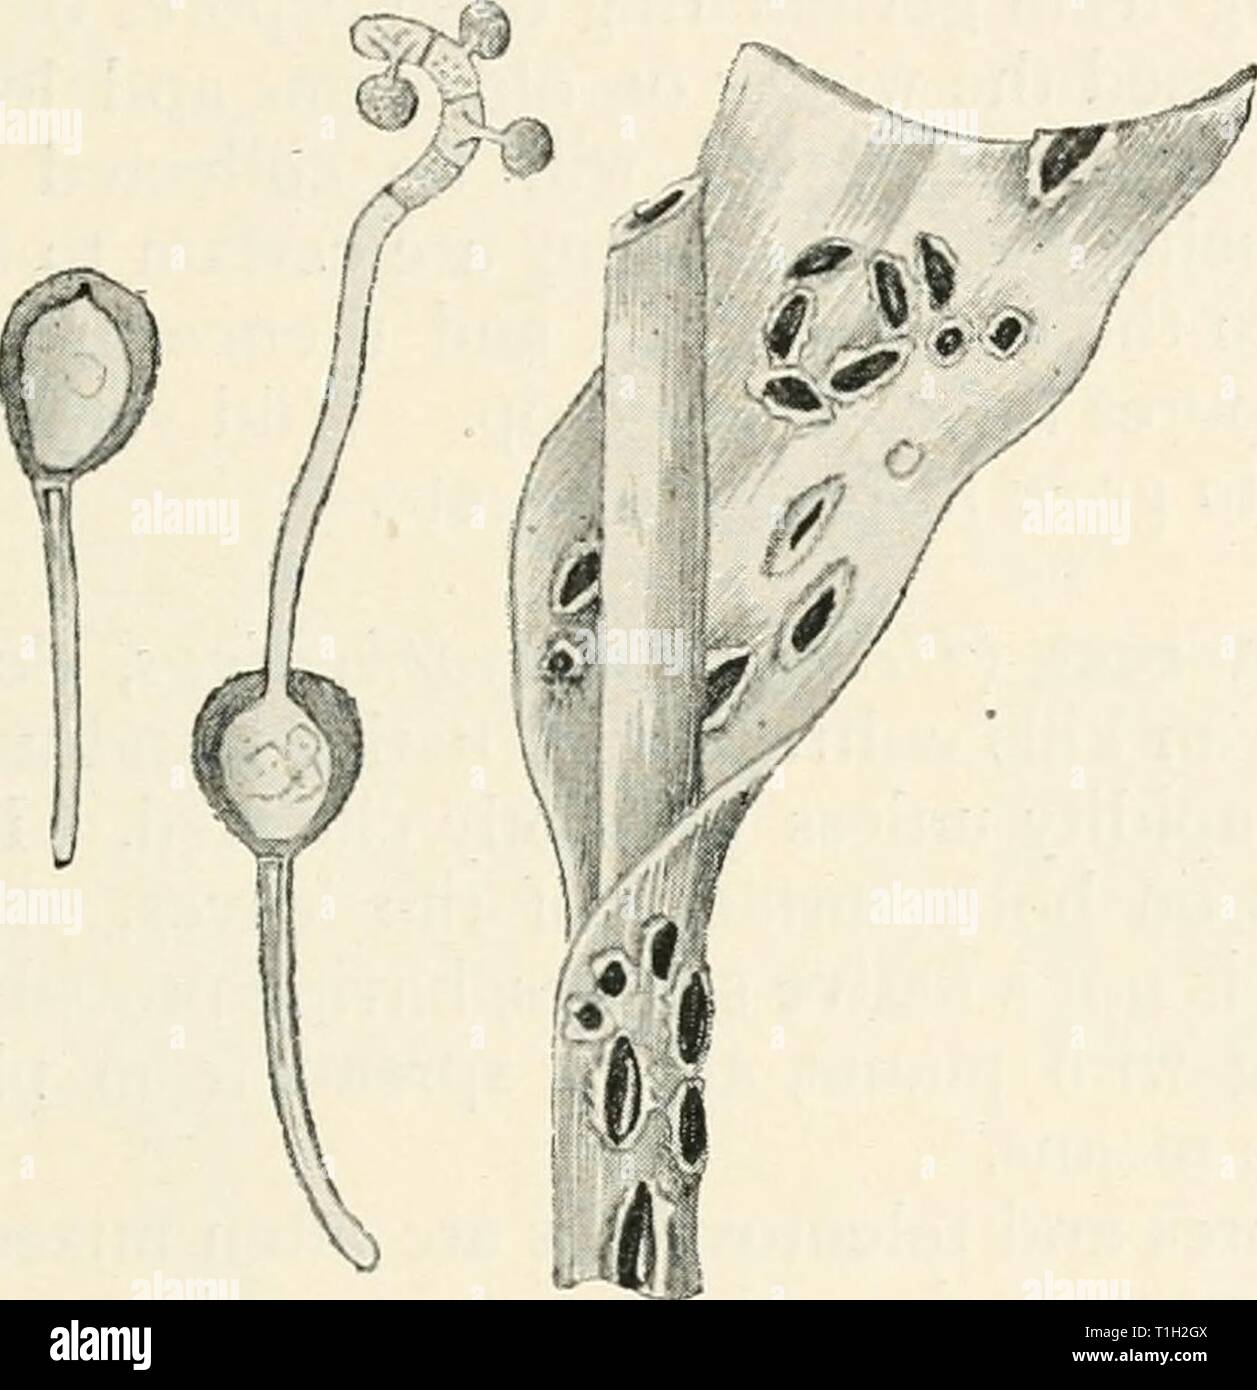 Diseases of cultivated plants and Diseases of cultivated plants and trees  diseasesofcultiv00massuoft Year: [1910?]  UROMYCES 293 Haricot bean rust.—Haricot beans or 'scarlet-runners' are often attacked by Uromyces appendiculatus (Link.) causing the leaves to fall early, when the development of pods is checked. Aecidia, uredo, and teleutospore stages all follow in succession, forming numerous minute brown pustules on the leaves. Aecidiospores angularly globose, whitish, slightly punctulate, 17-32 X 14-20/x. Uredospores pale brown, aculeolate, 24-33X 16-20 /. Teleutospores elliptical or subglob Stock Photo